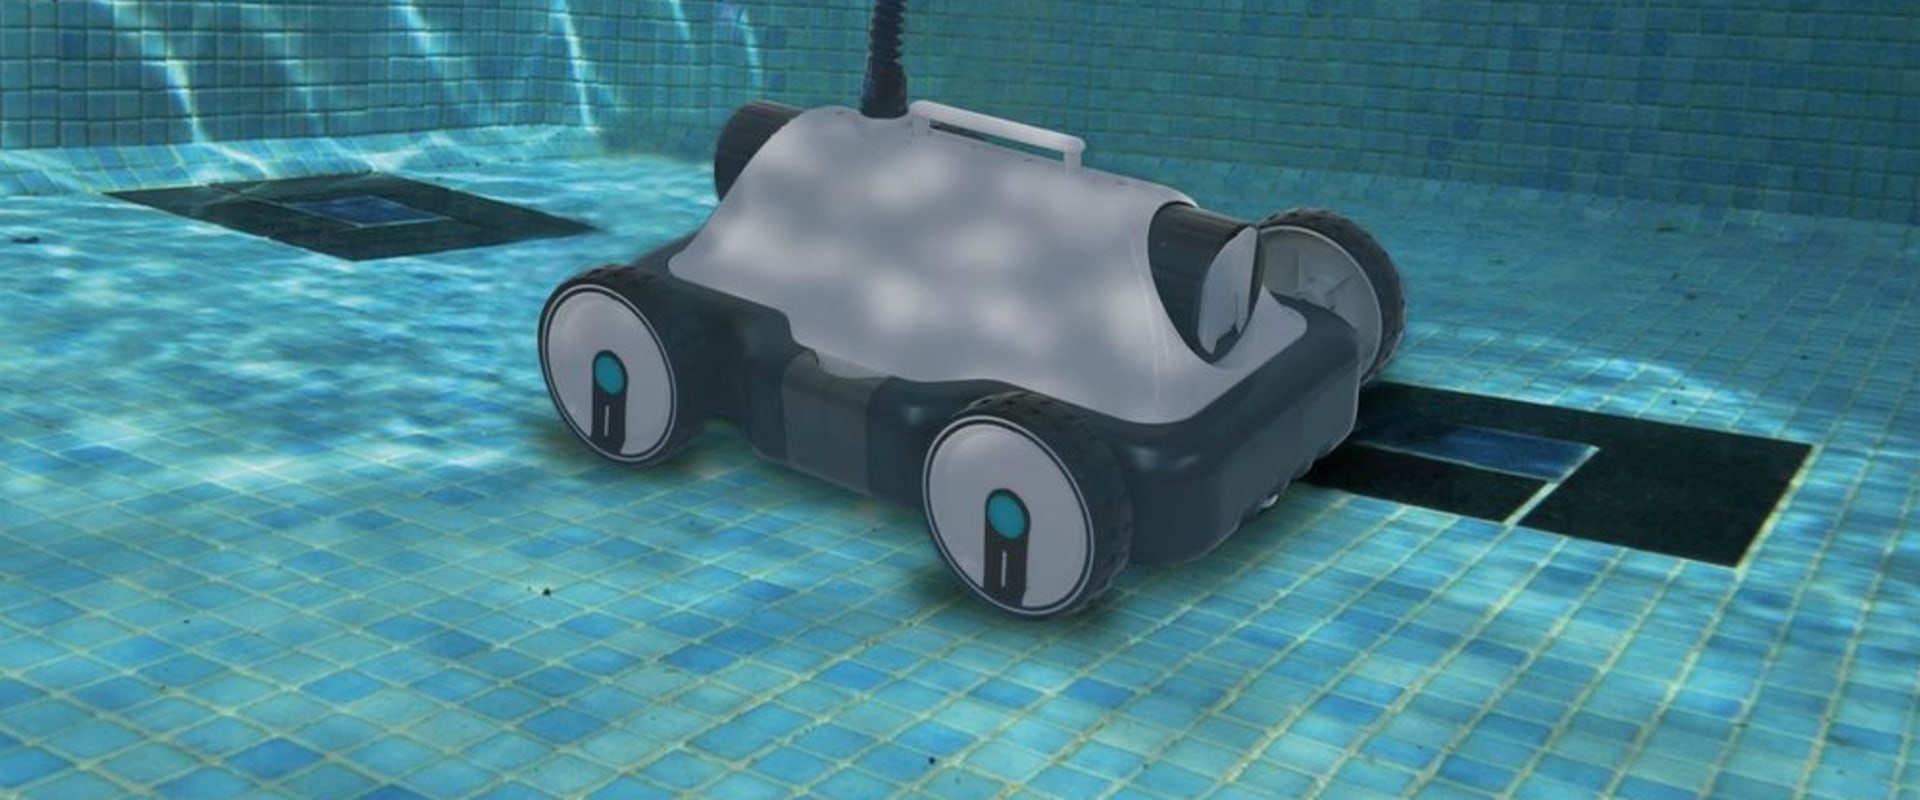 Using a Robotic Pool Cleaner: Automatic Cleaning Methods